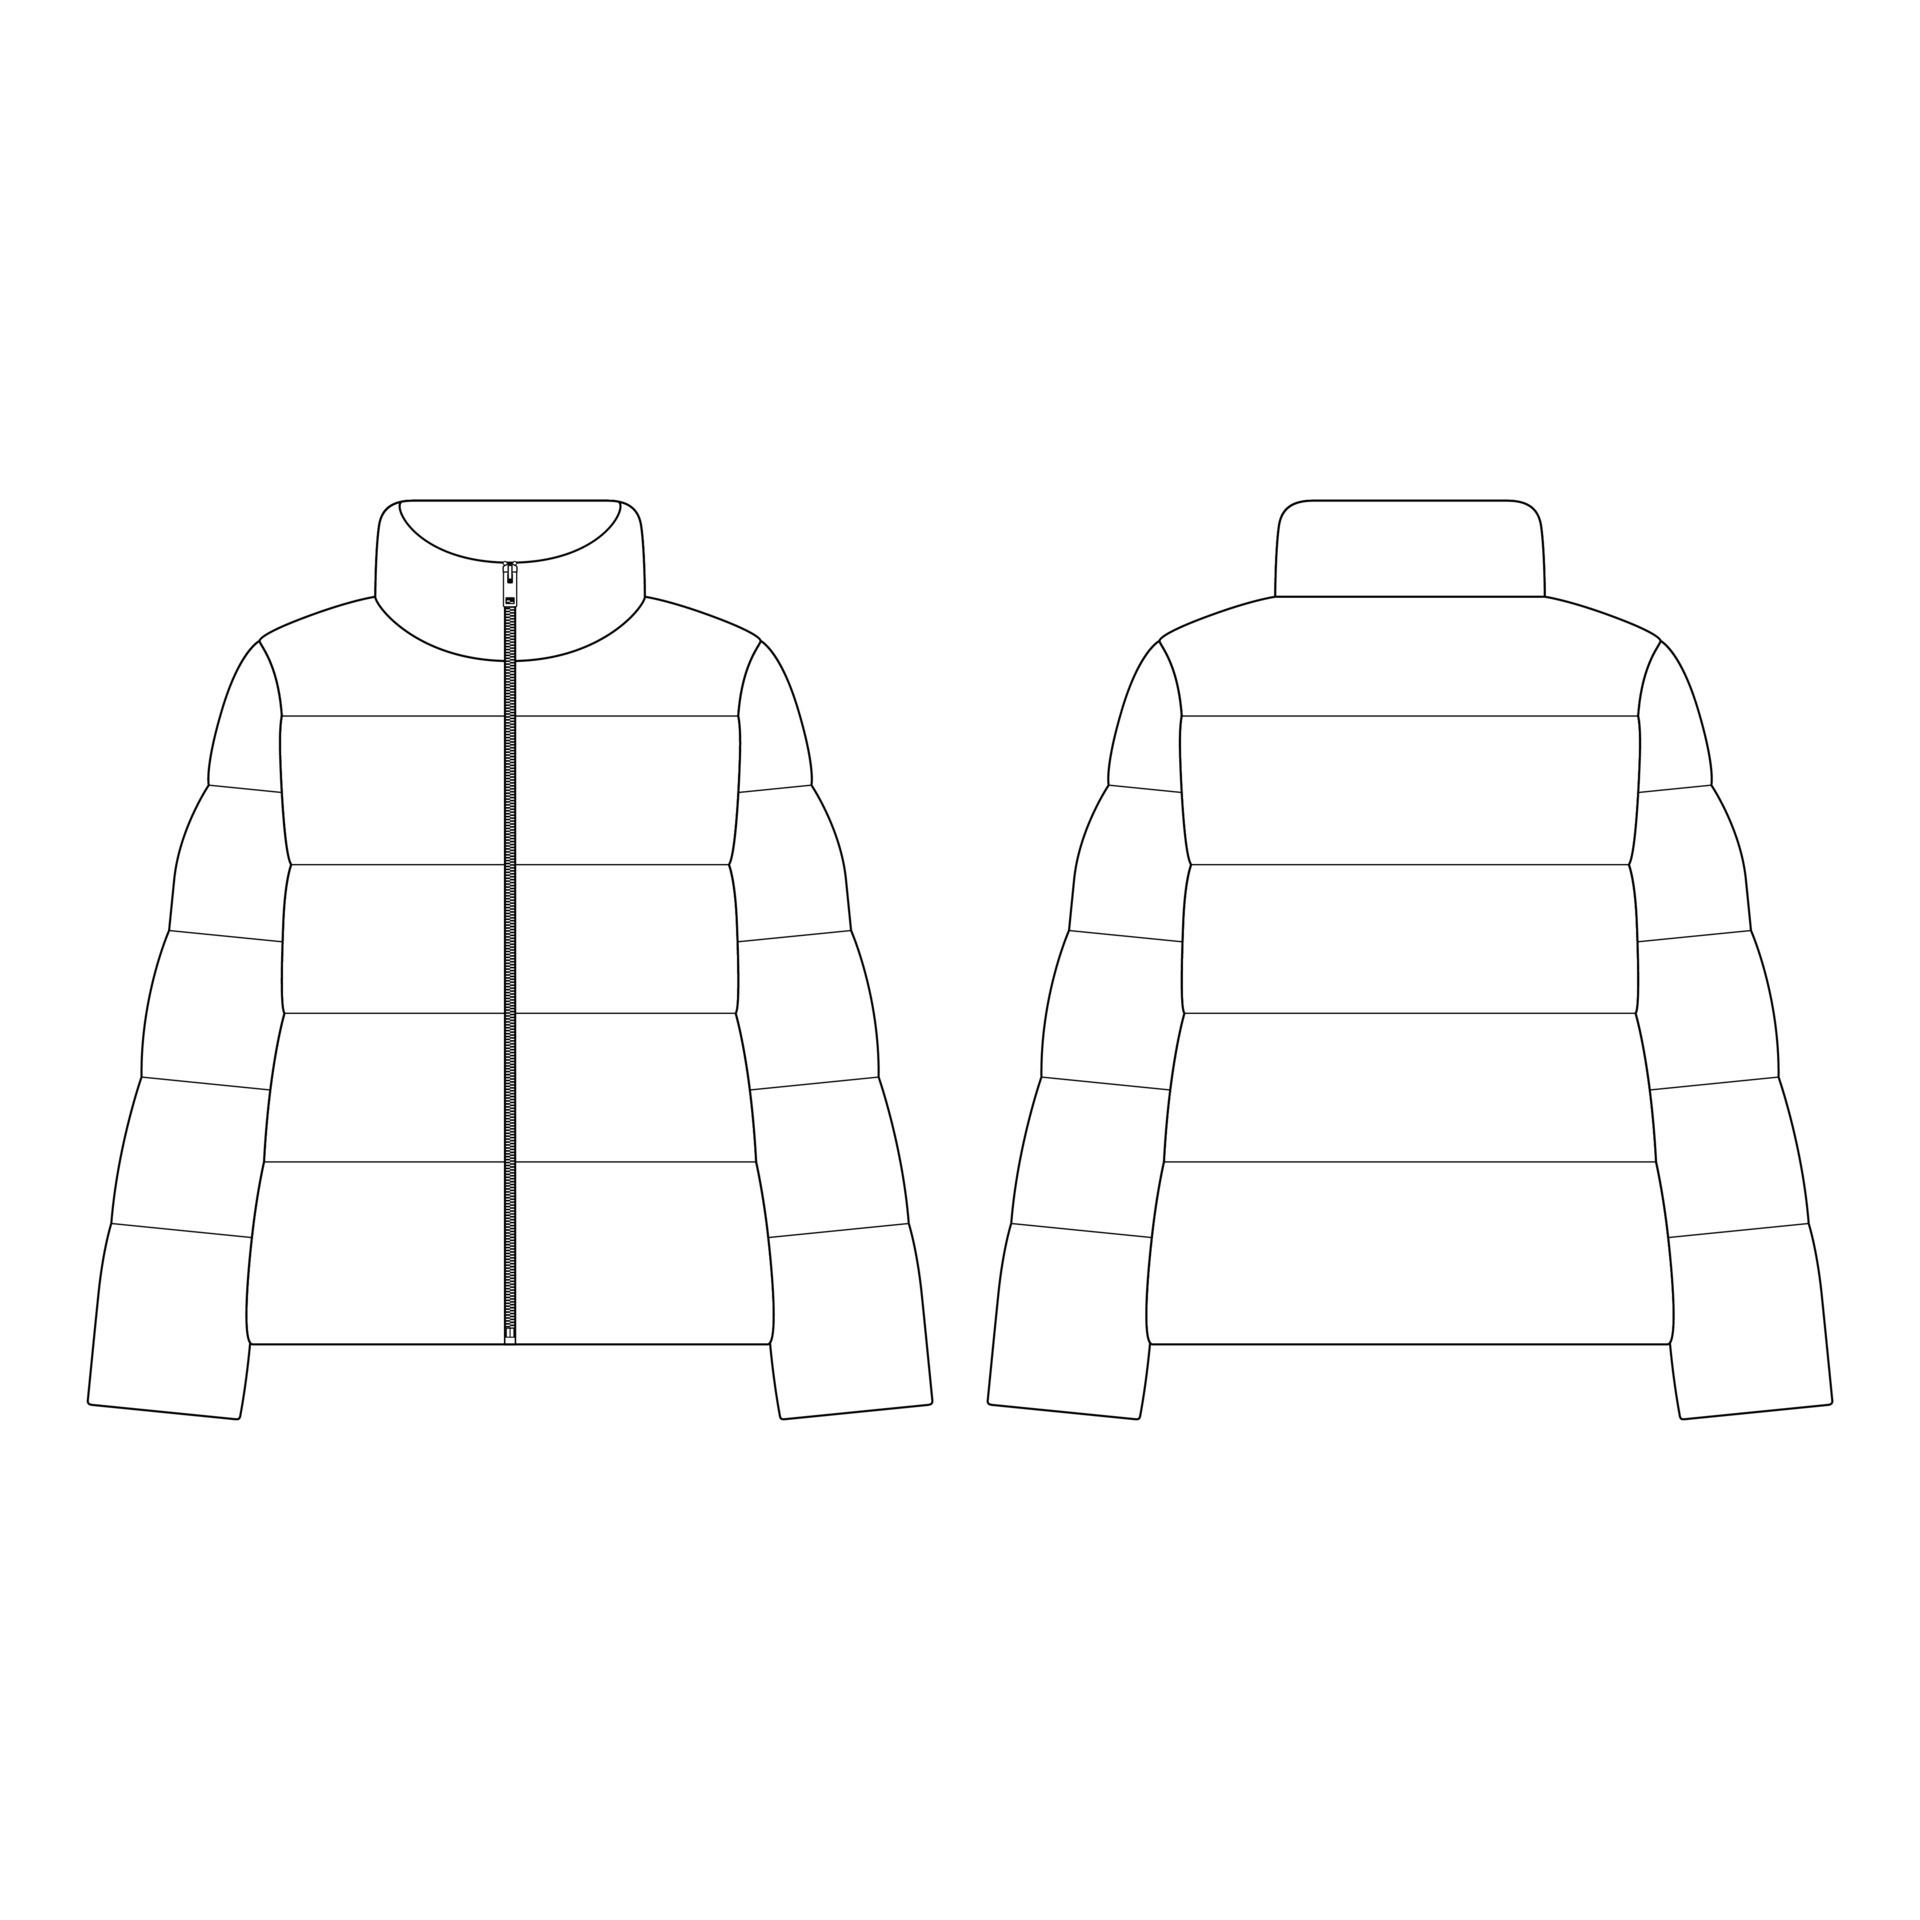 Premium Vector  Jacket puffer jacket technical illustration draw vector  clothes vector woman clothes